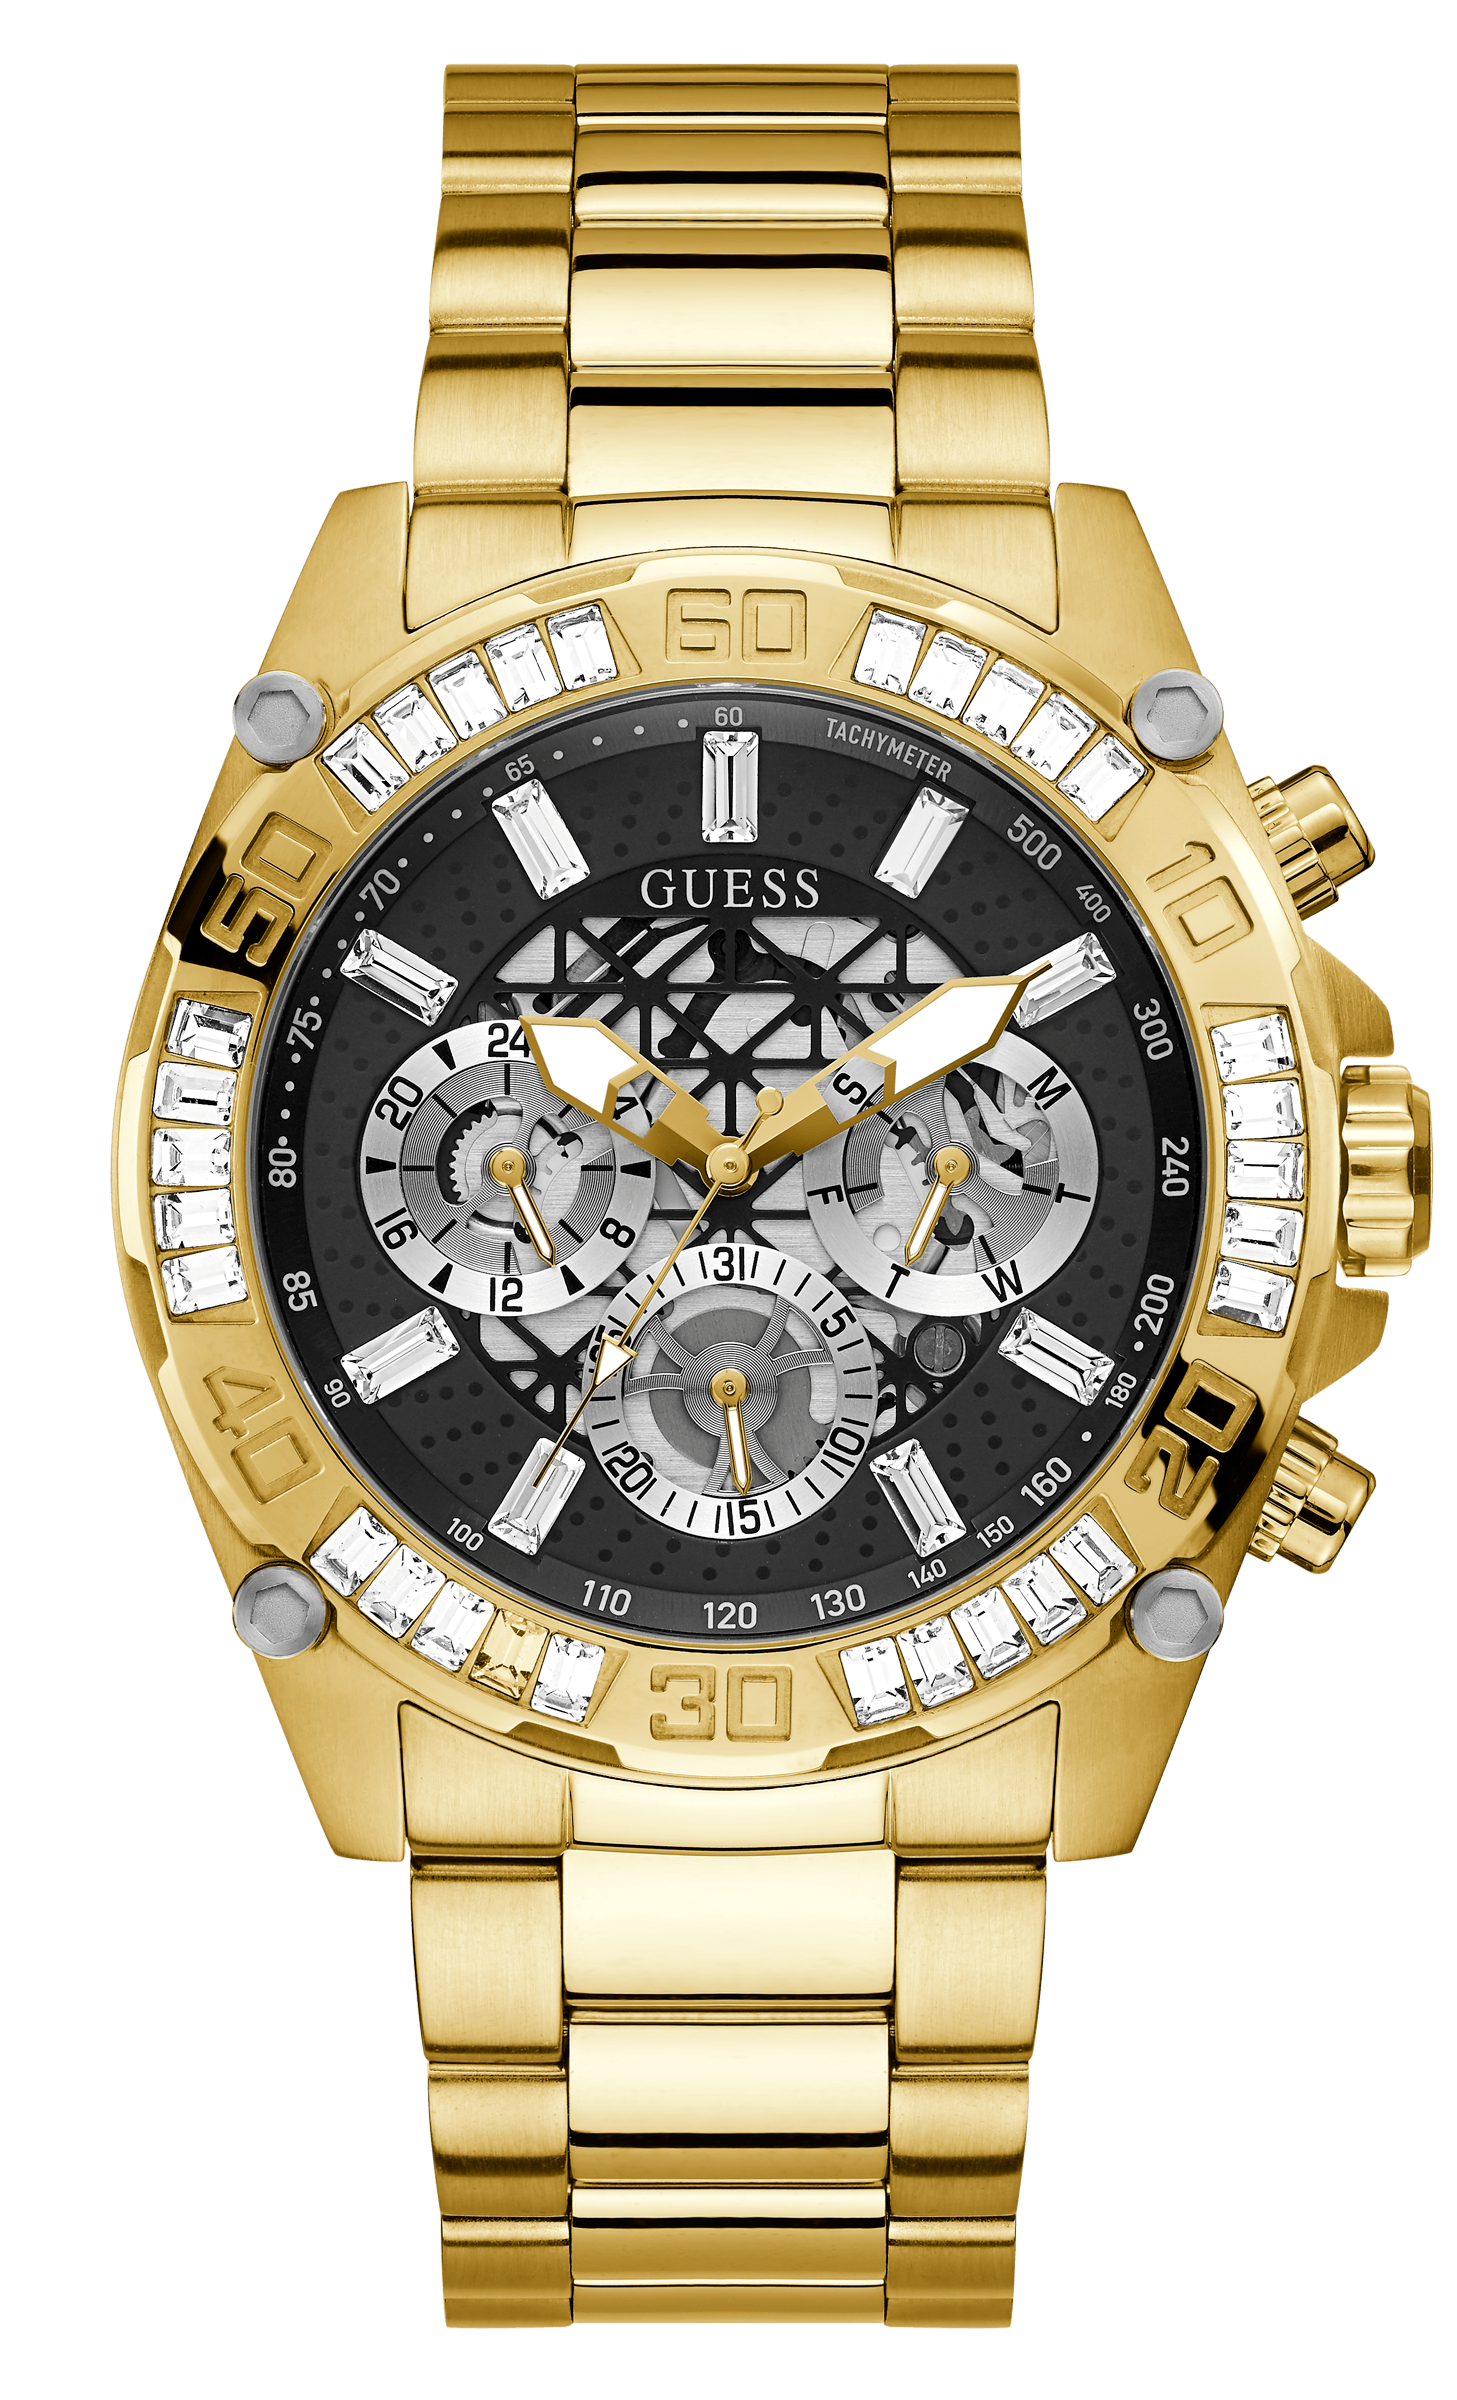 Guess Trophy Black and Gold Men's Analogue Watch GW0390G2 Watches Guess 